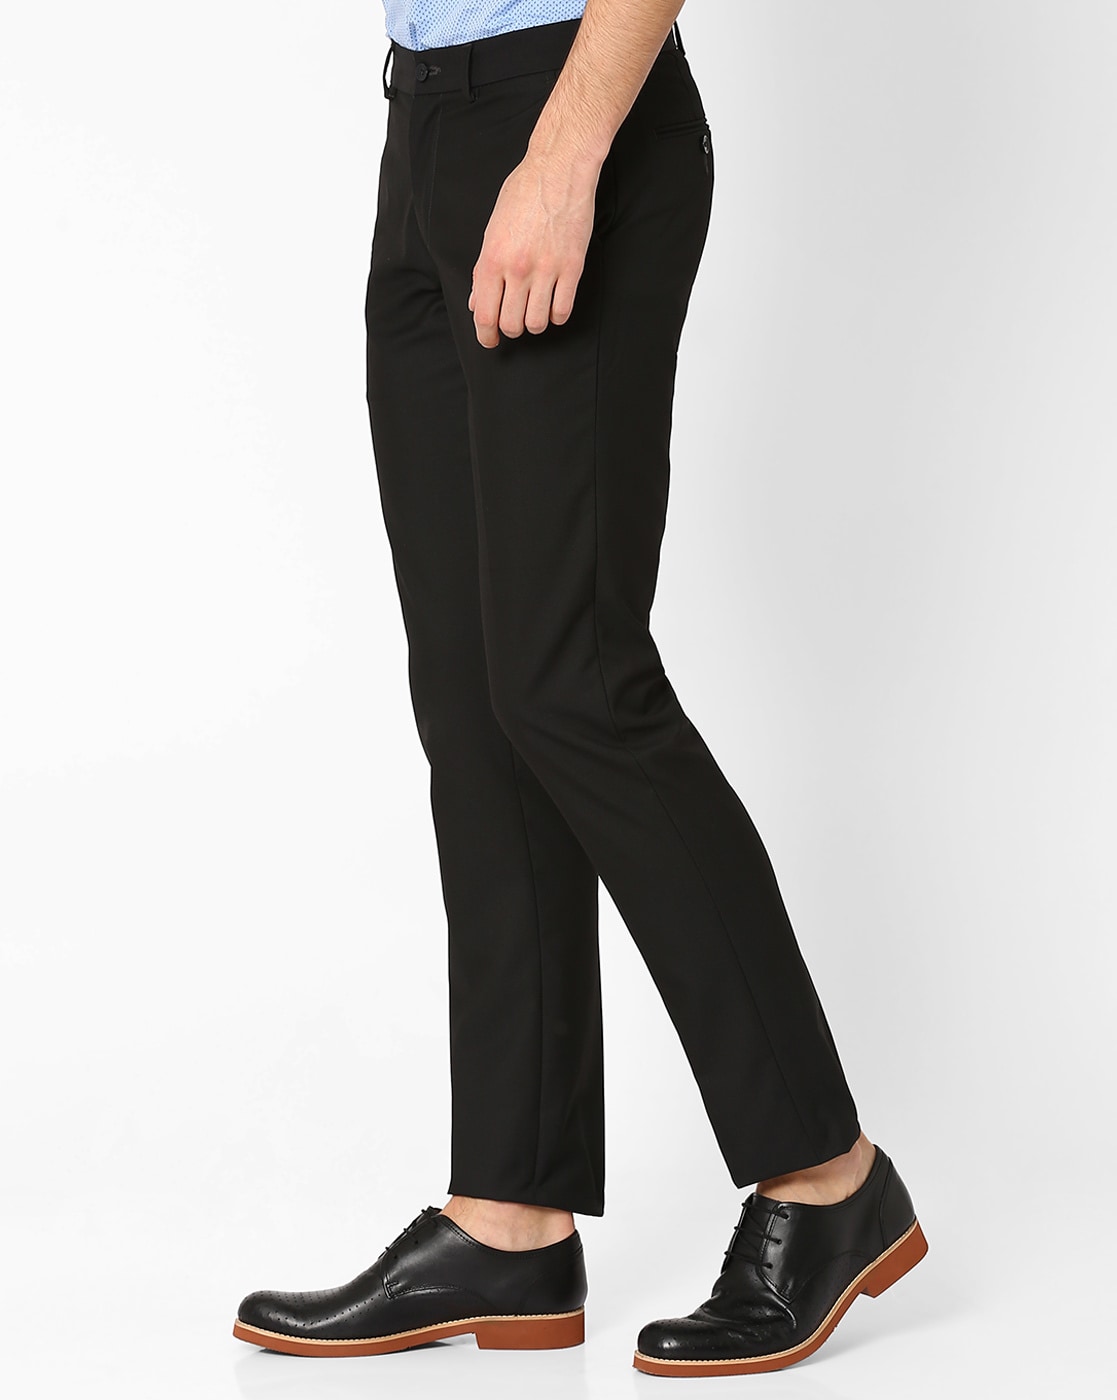 Buy Black Worsted Trouser with Back Elastic For Women Online  Best Prices  in India  UNIFORM BUCKET